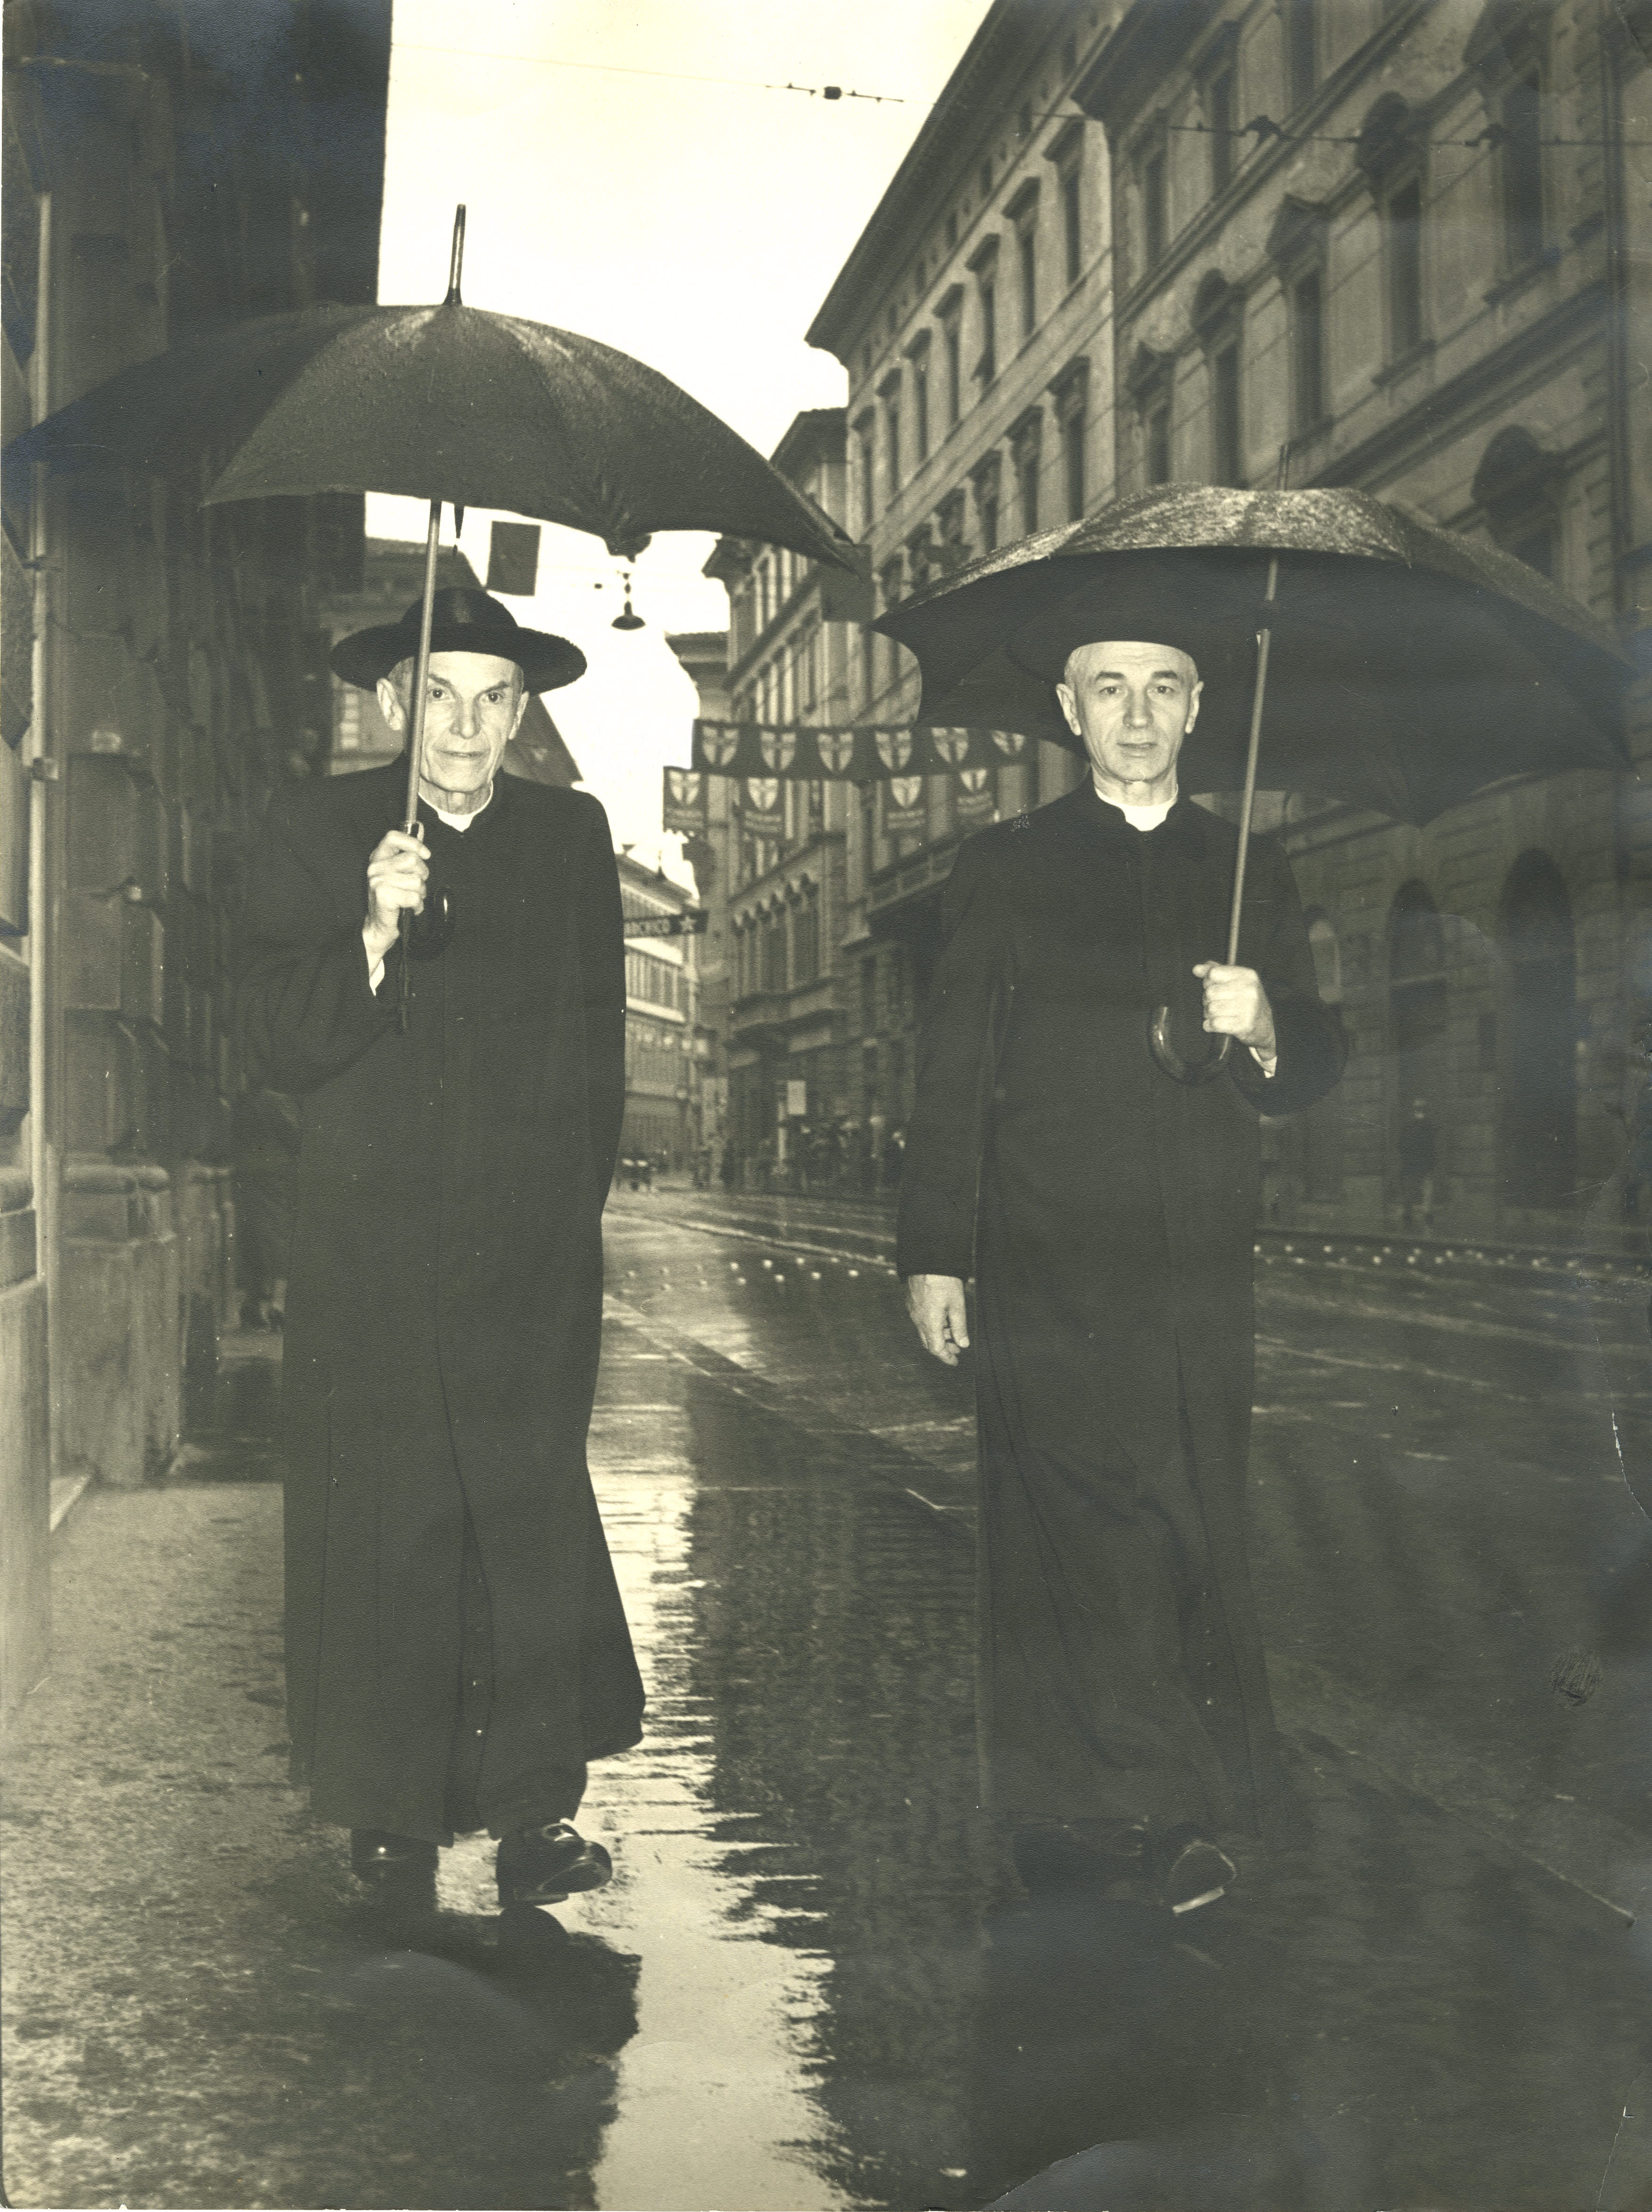 Cardinal Dalla Costa (left) with Mons. Meneghello shortly after the end of the war, Mons. Meneghello (right) with Cardinal Dalla Costa, shortly after the end of the war